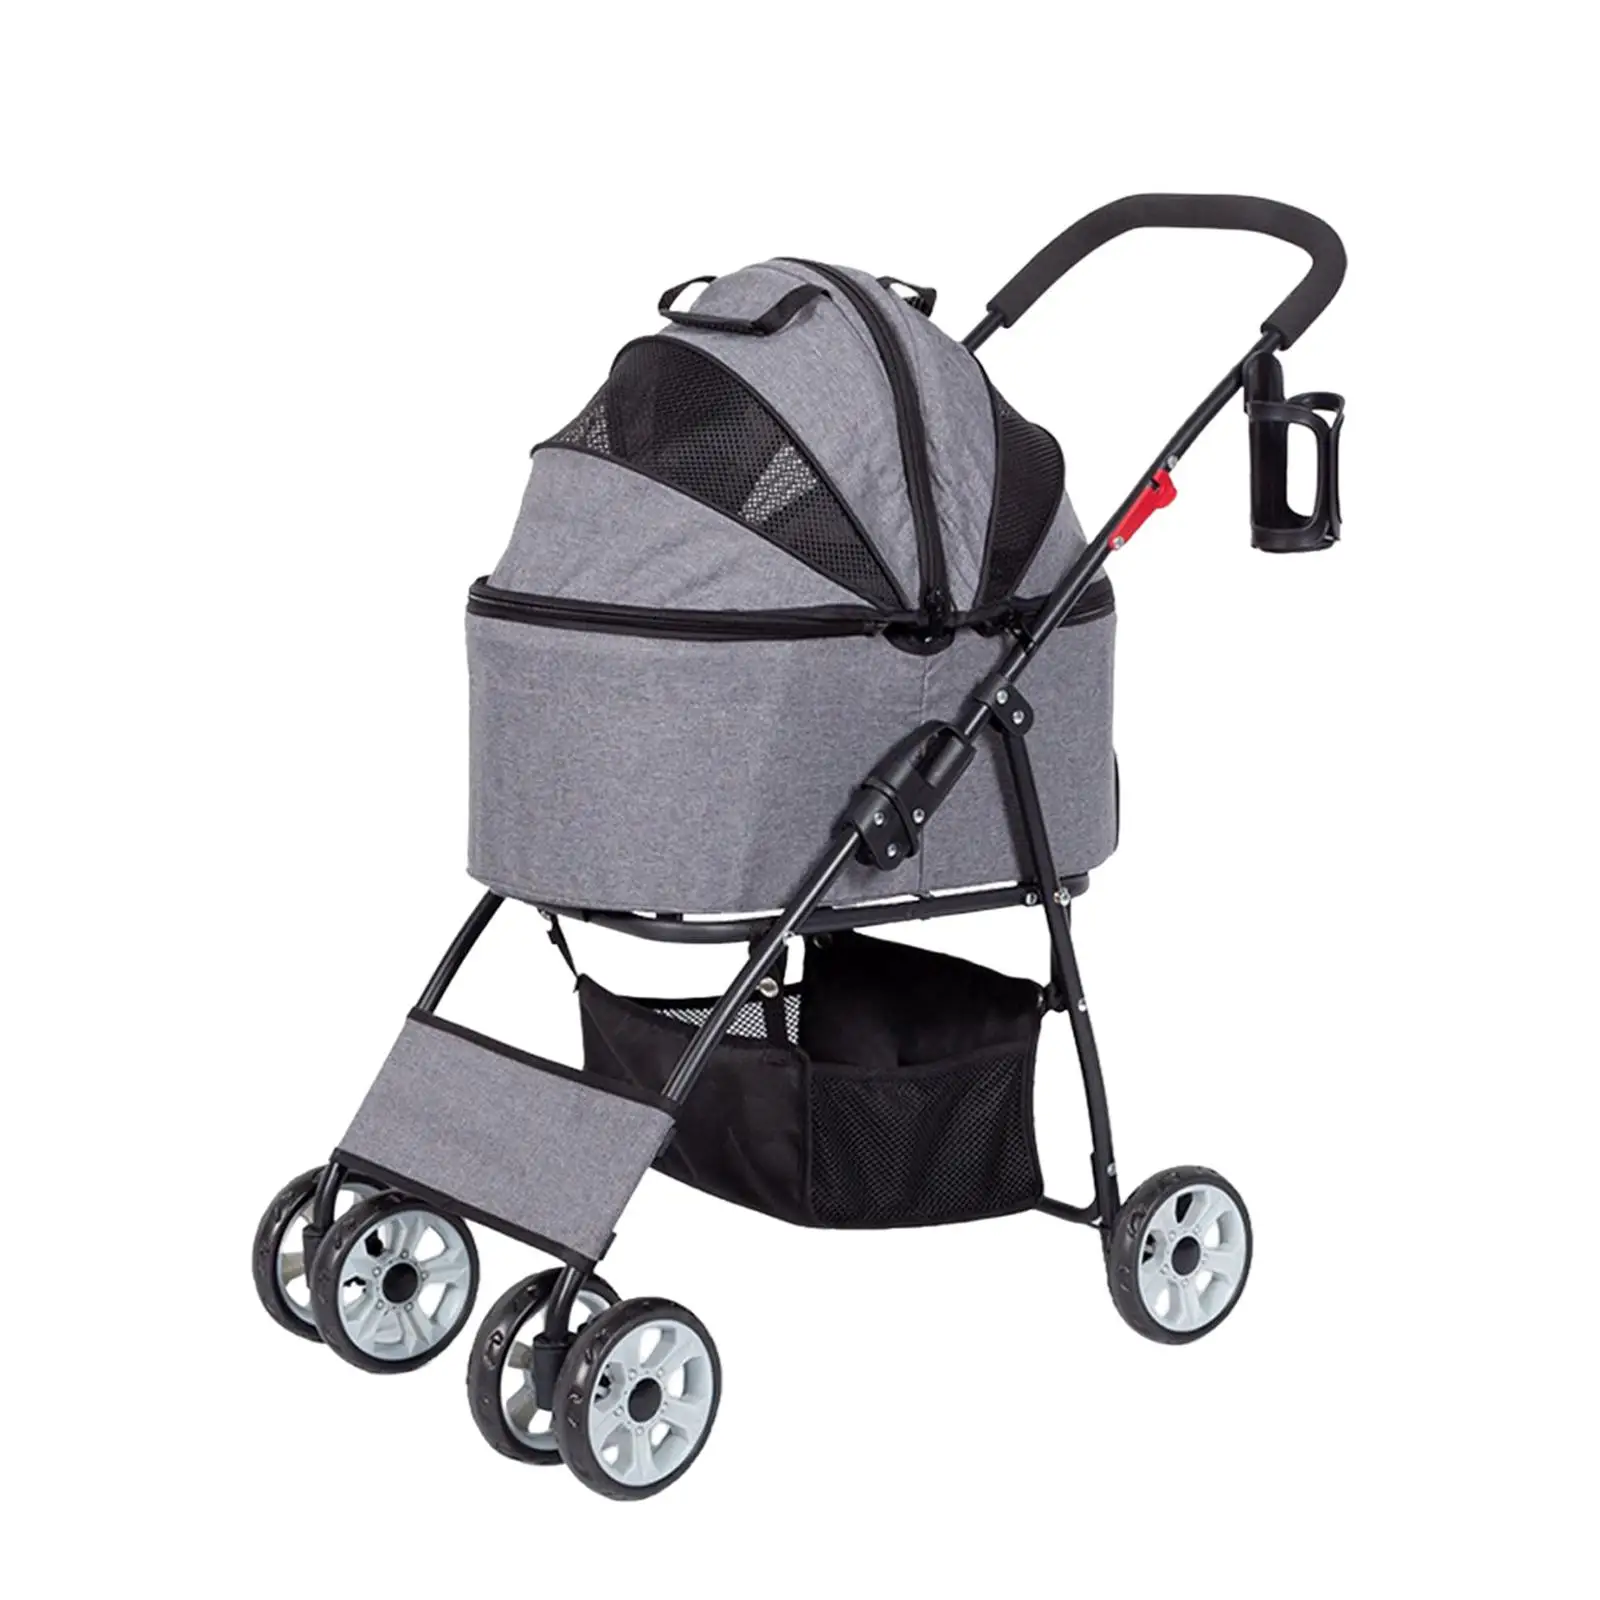 Portable Dog Stroller Folding Go Out Cart with Storage Basket with Mesh Top Pet